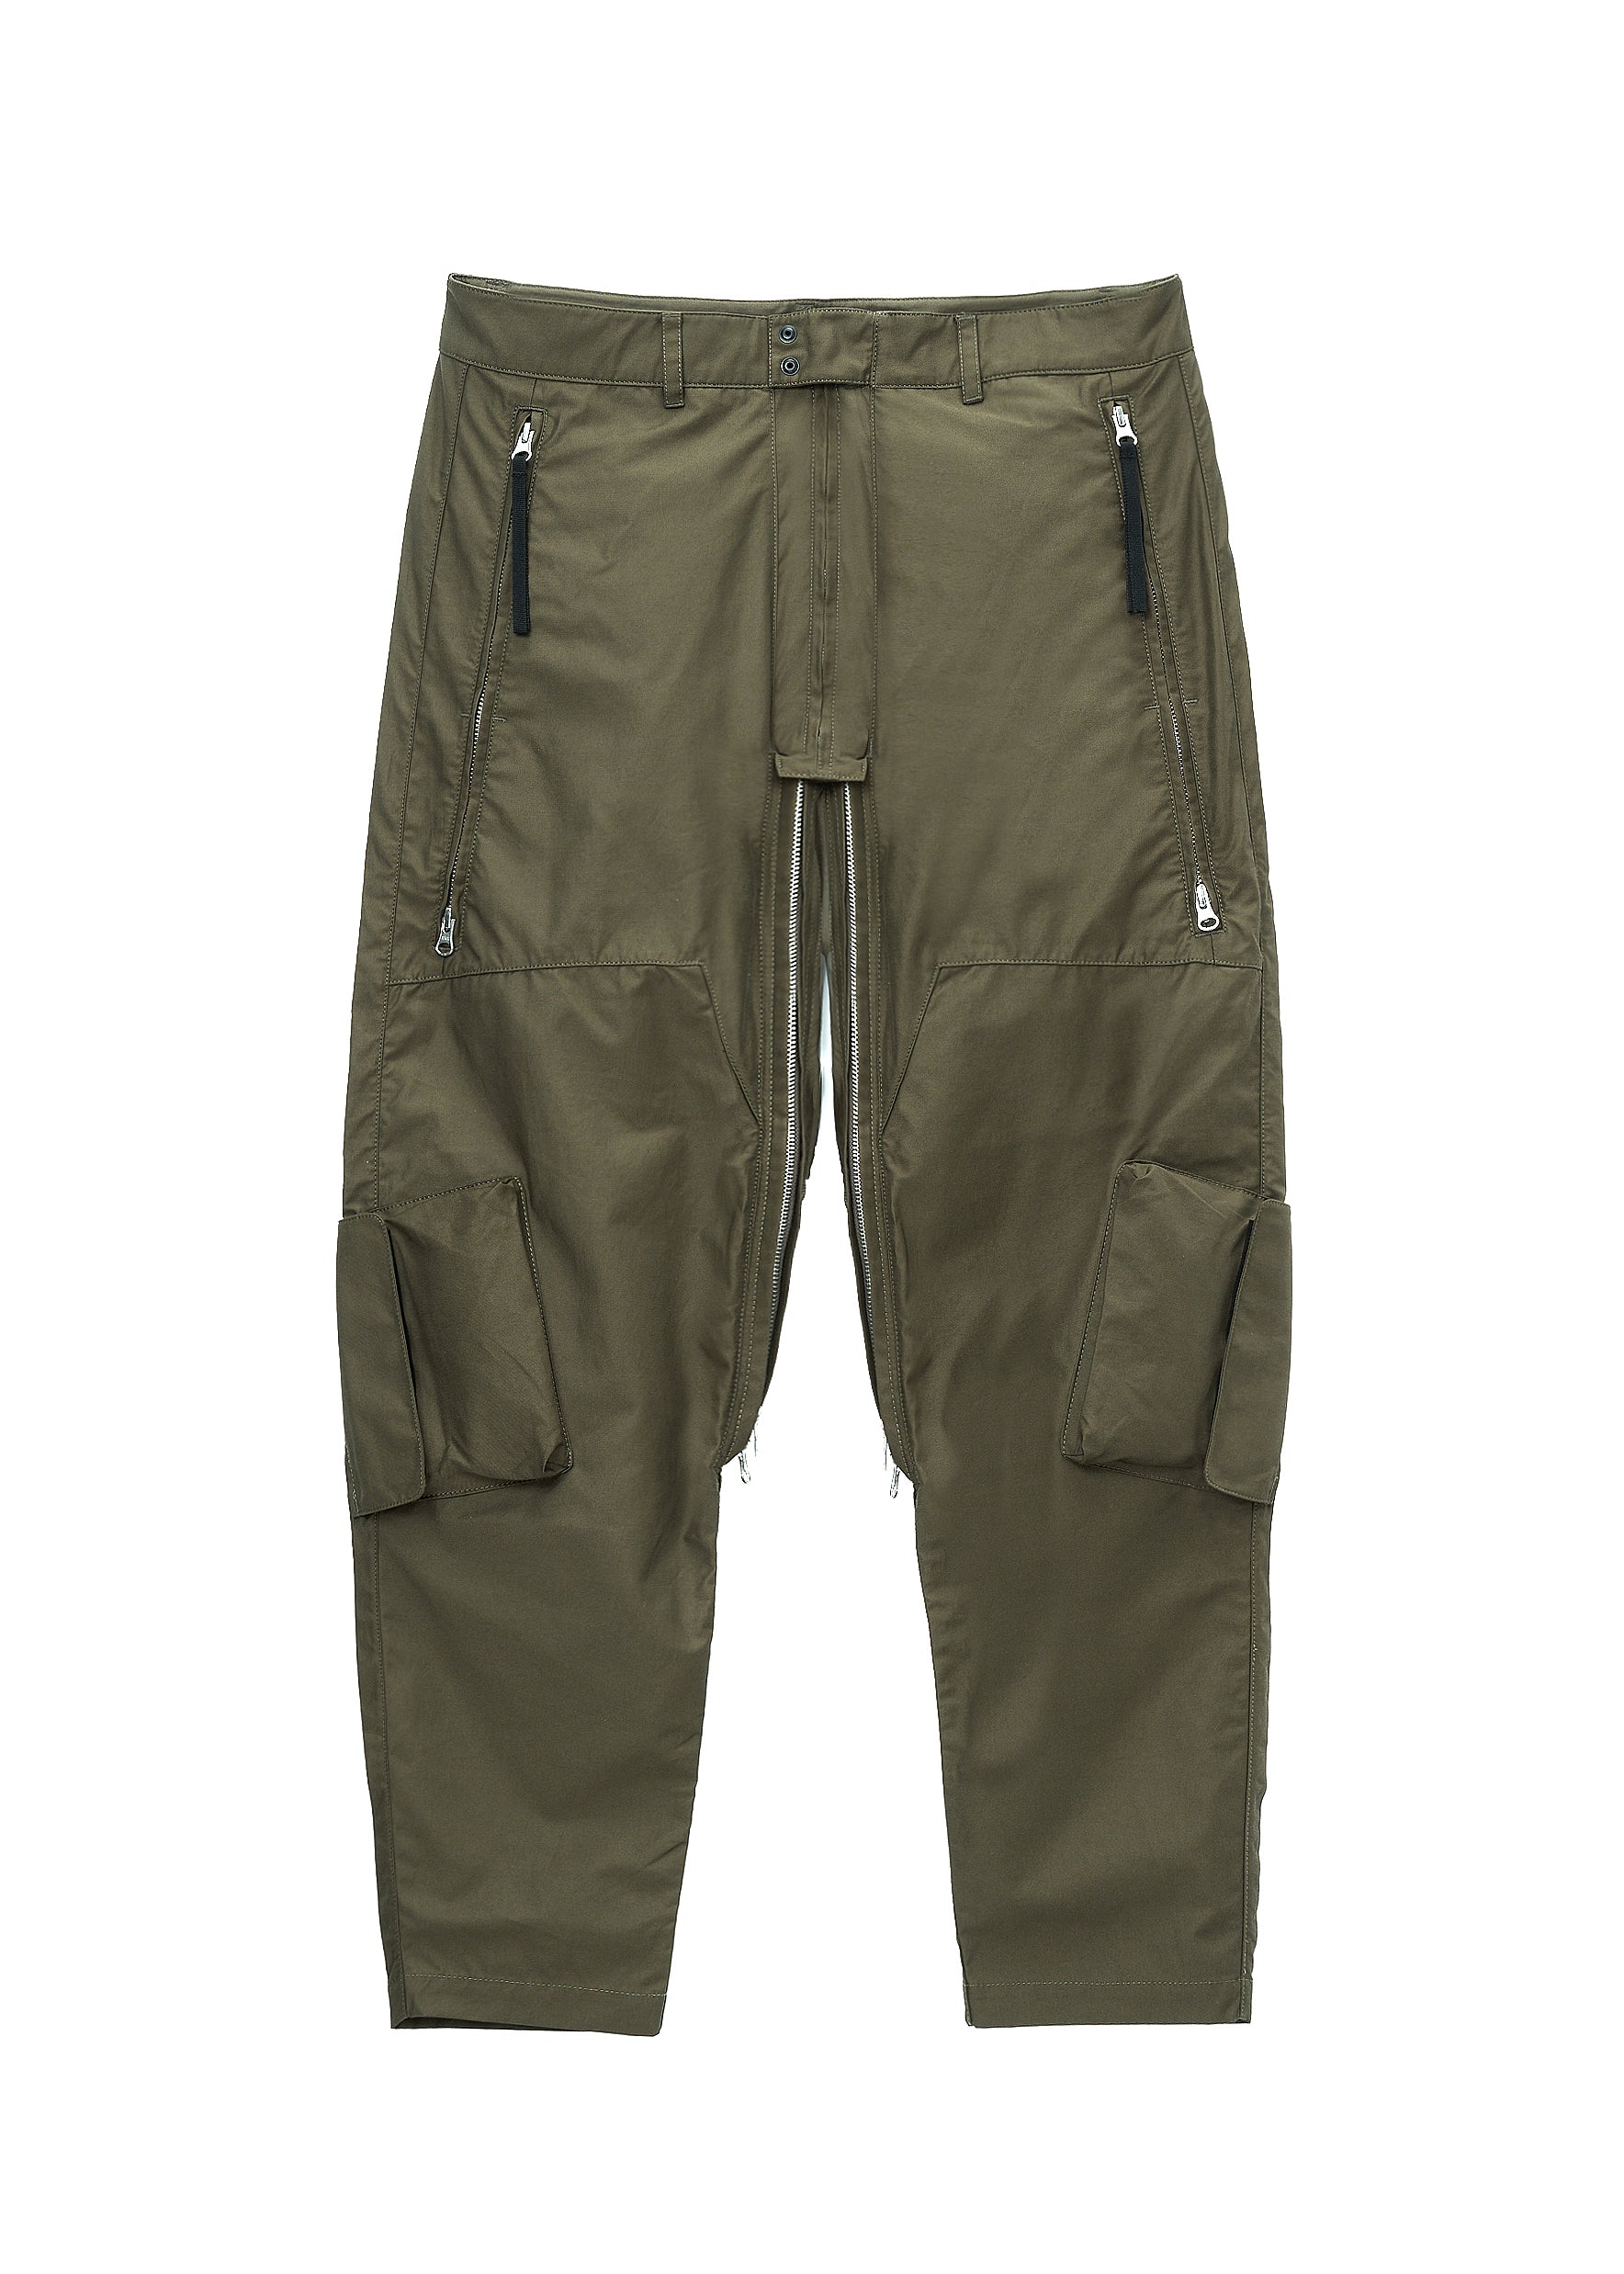 DWR ARTICULATED MILITARY PANTS